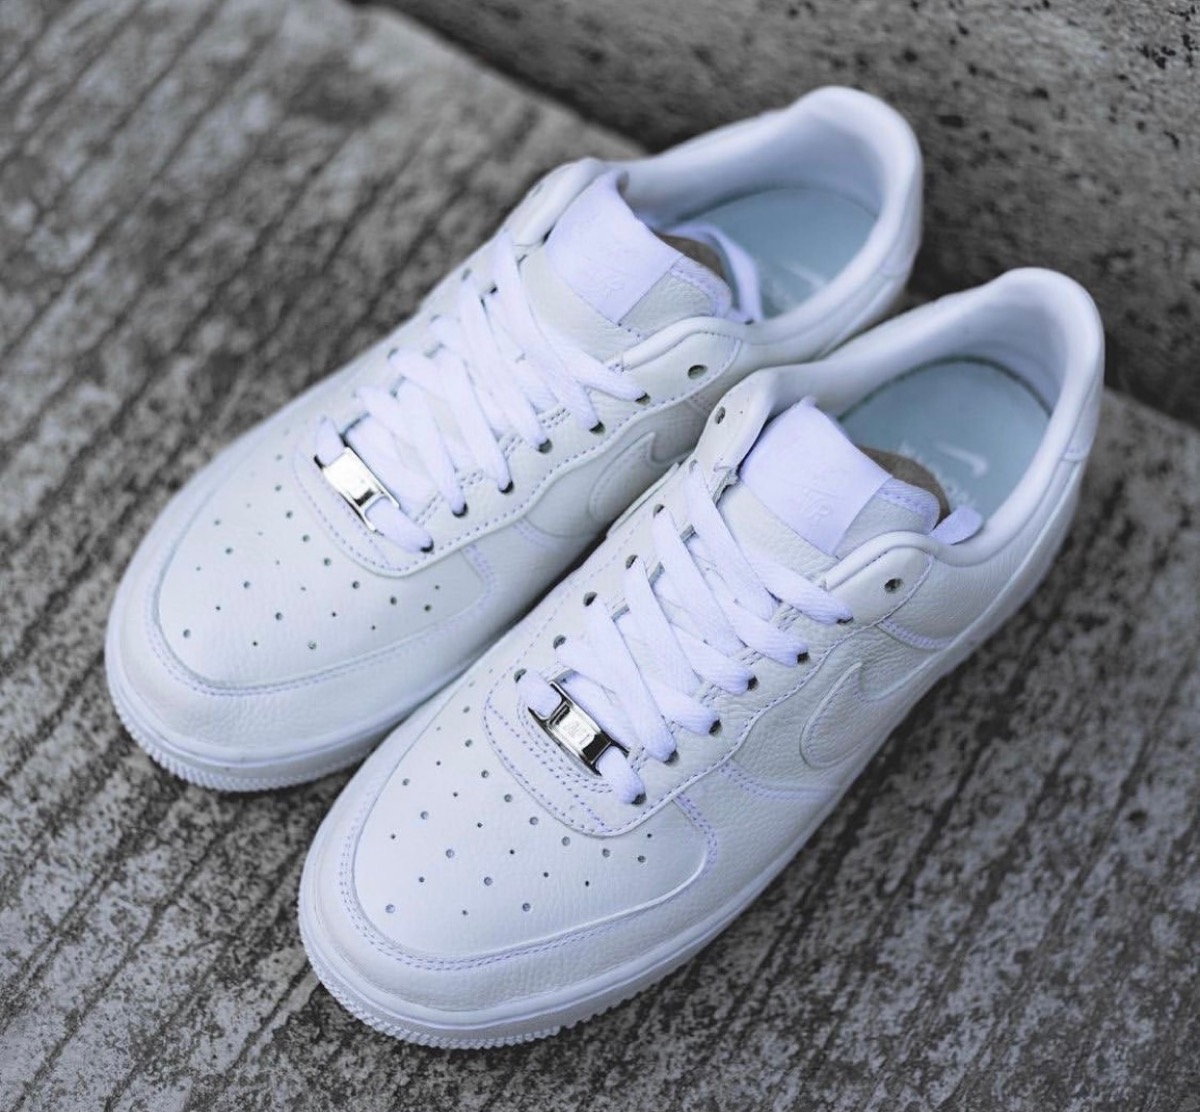 Drake Nocta × Nike Air Force 1 Low SP “Love You Forever”が国内11月